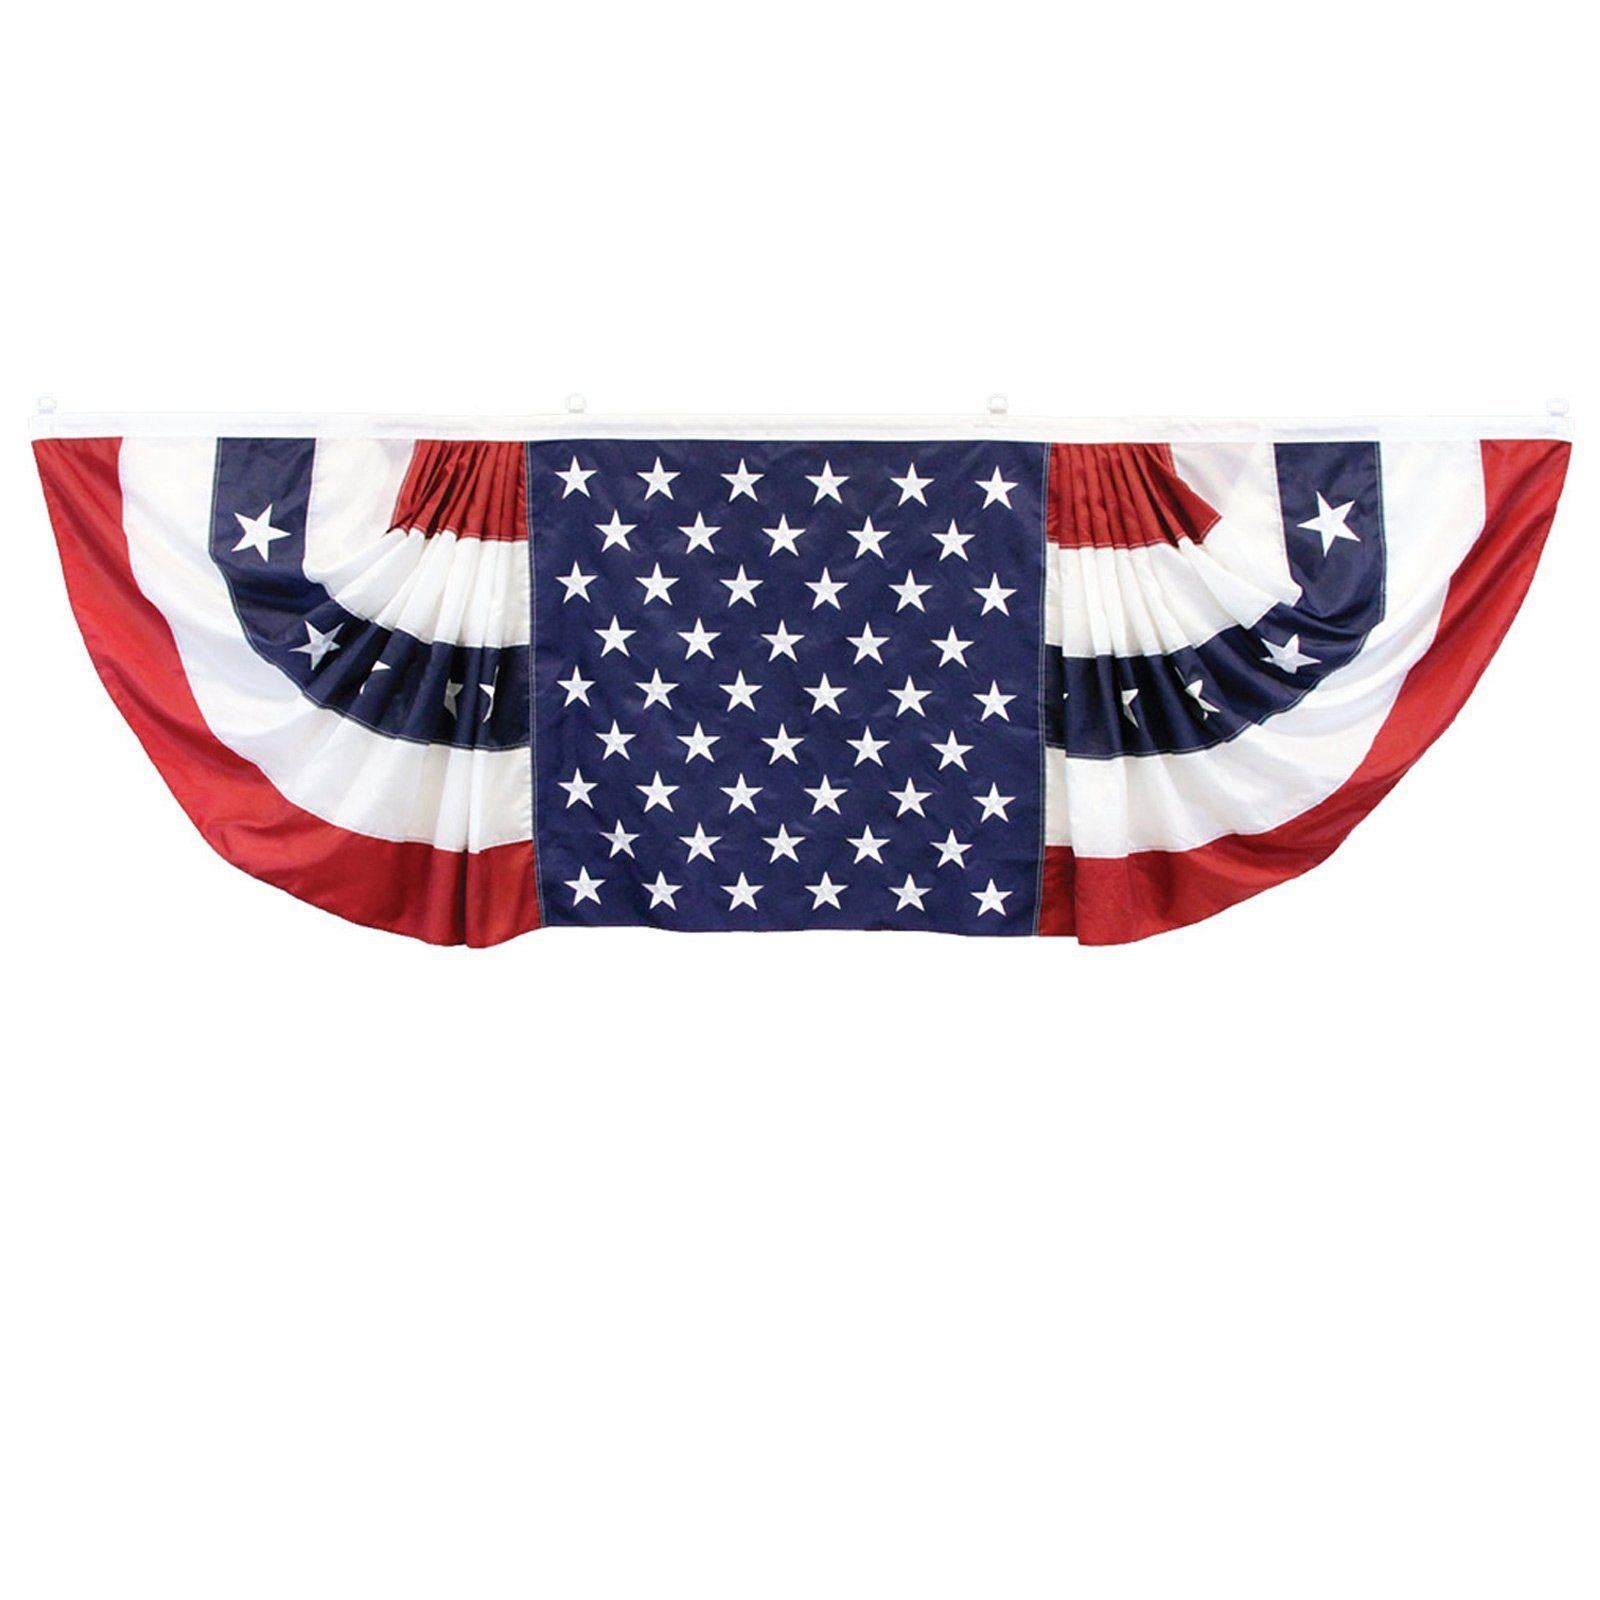 30 flag bunting - 9 metre long Usa State Tennessee 